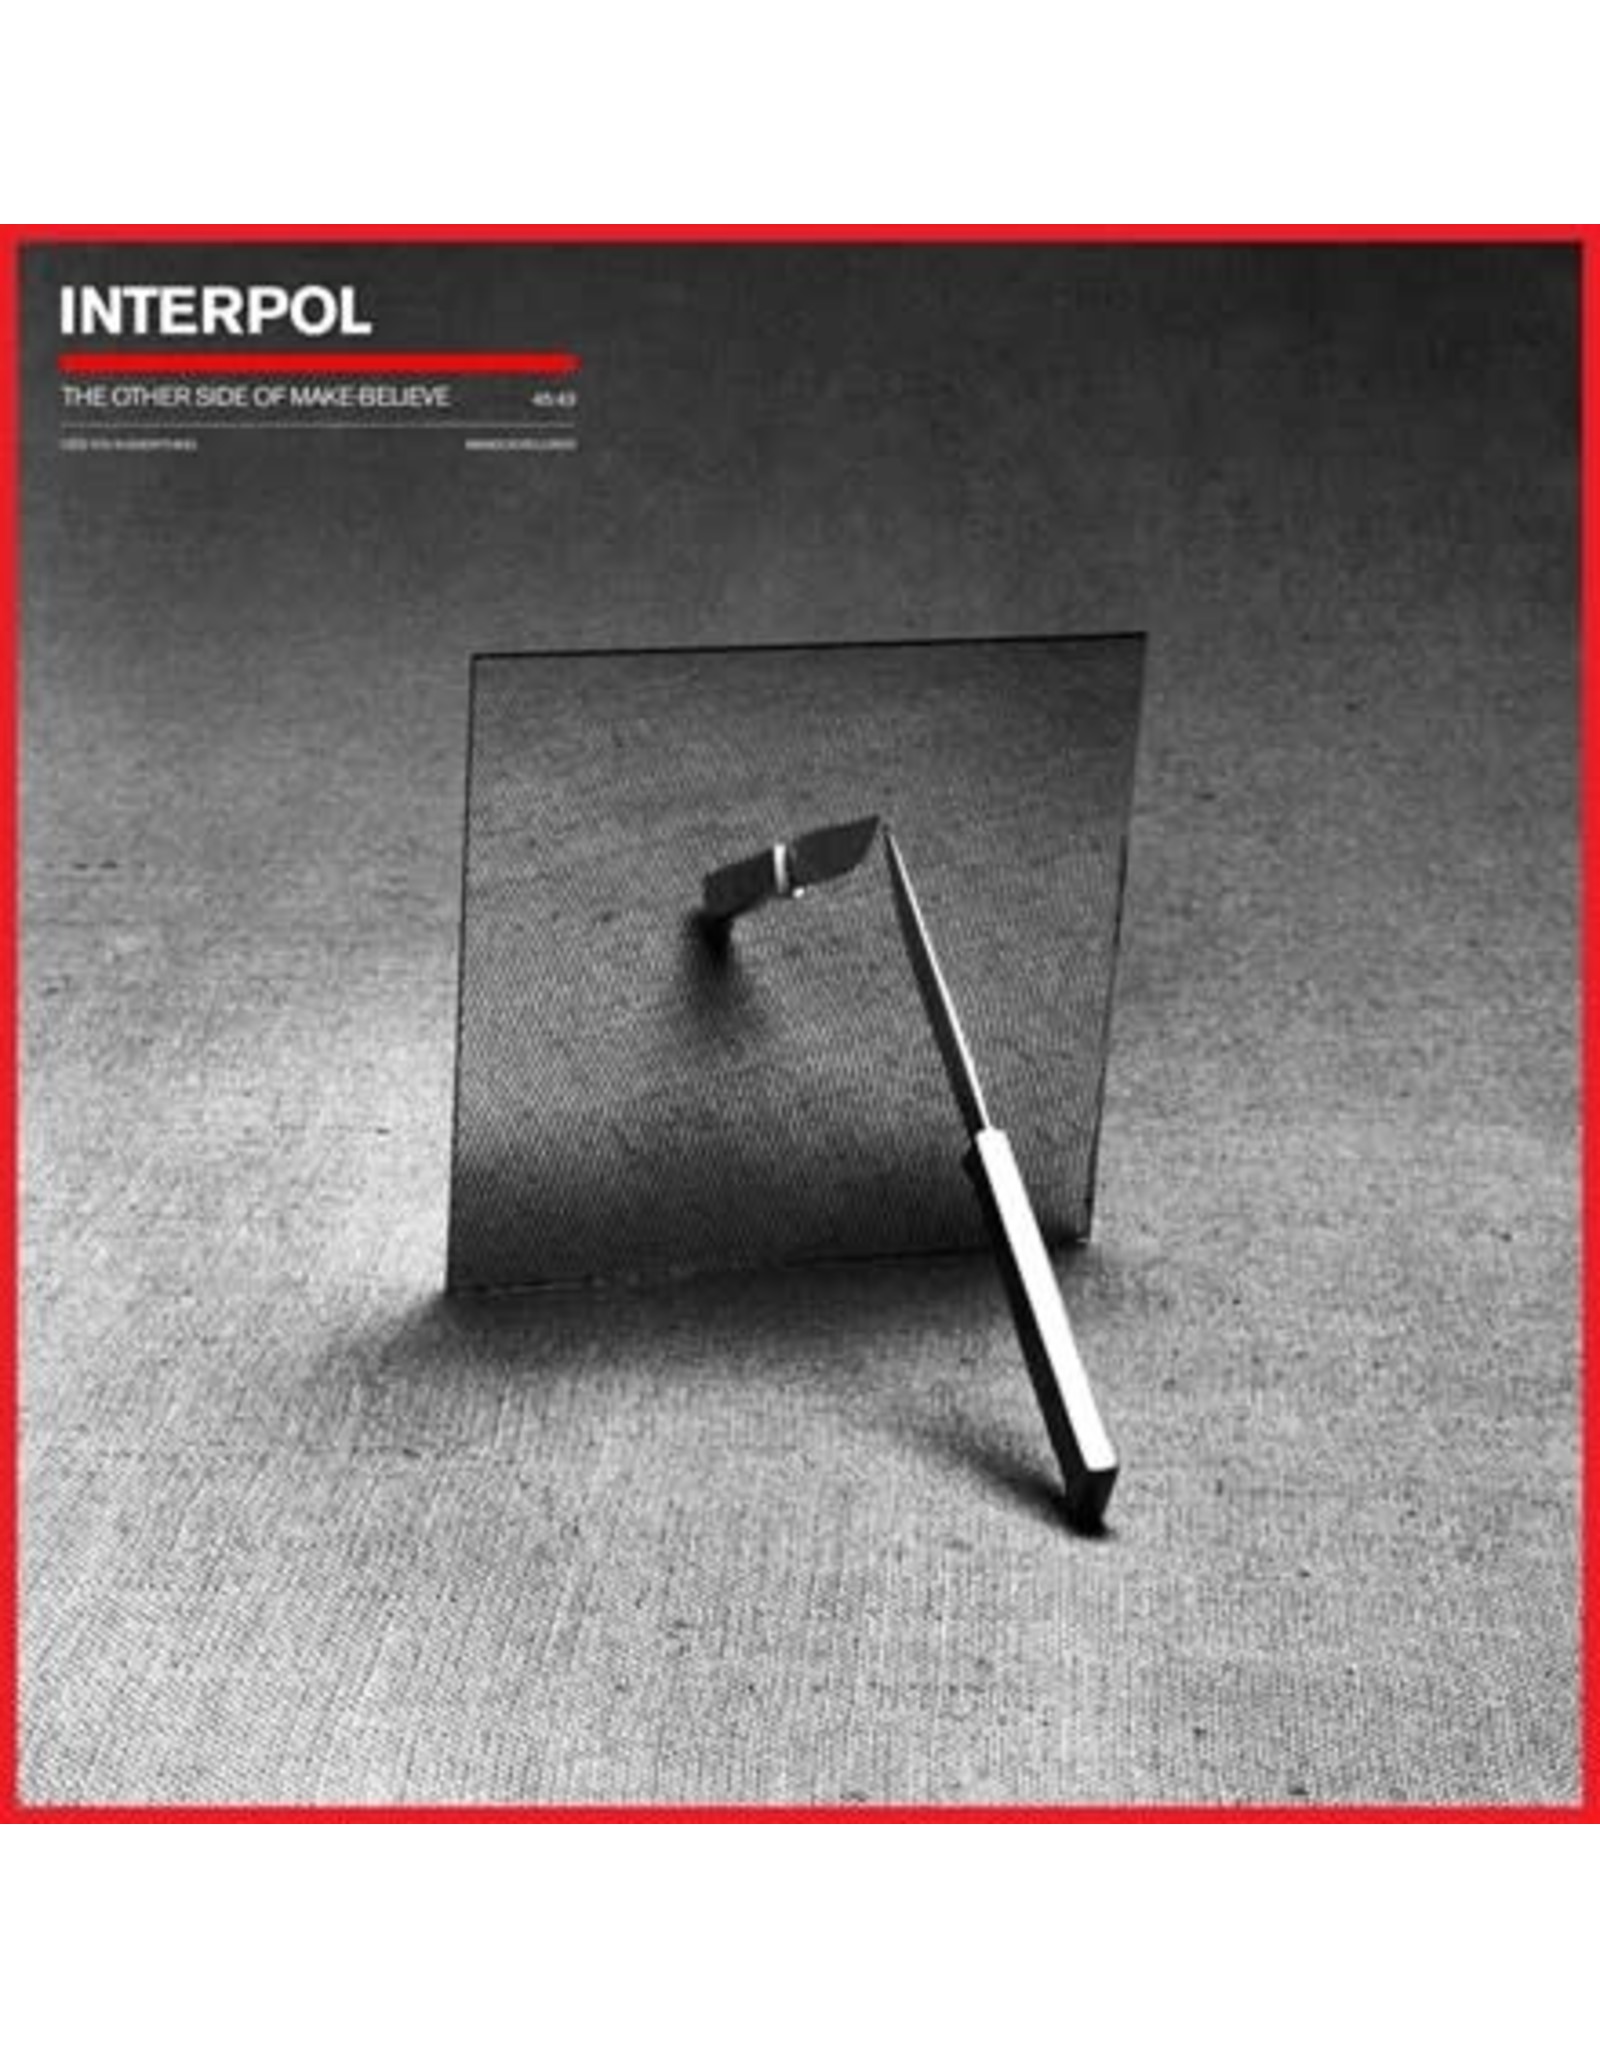 Matador Interpol: The Other Side Of Make-Believe (indie shop red) LP